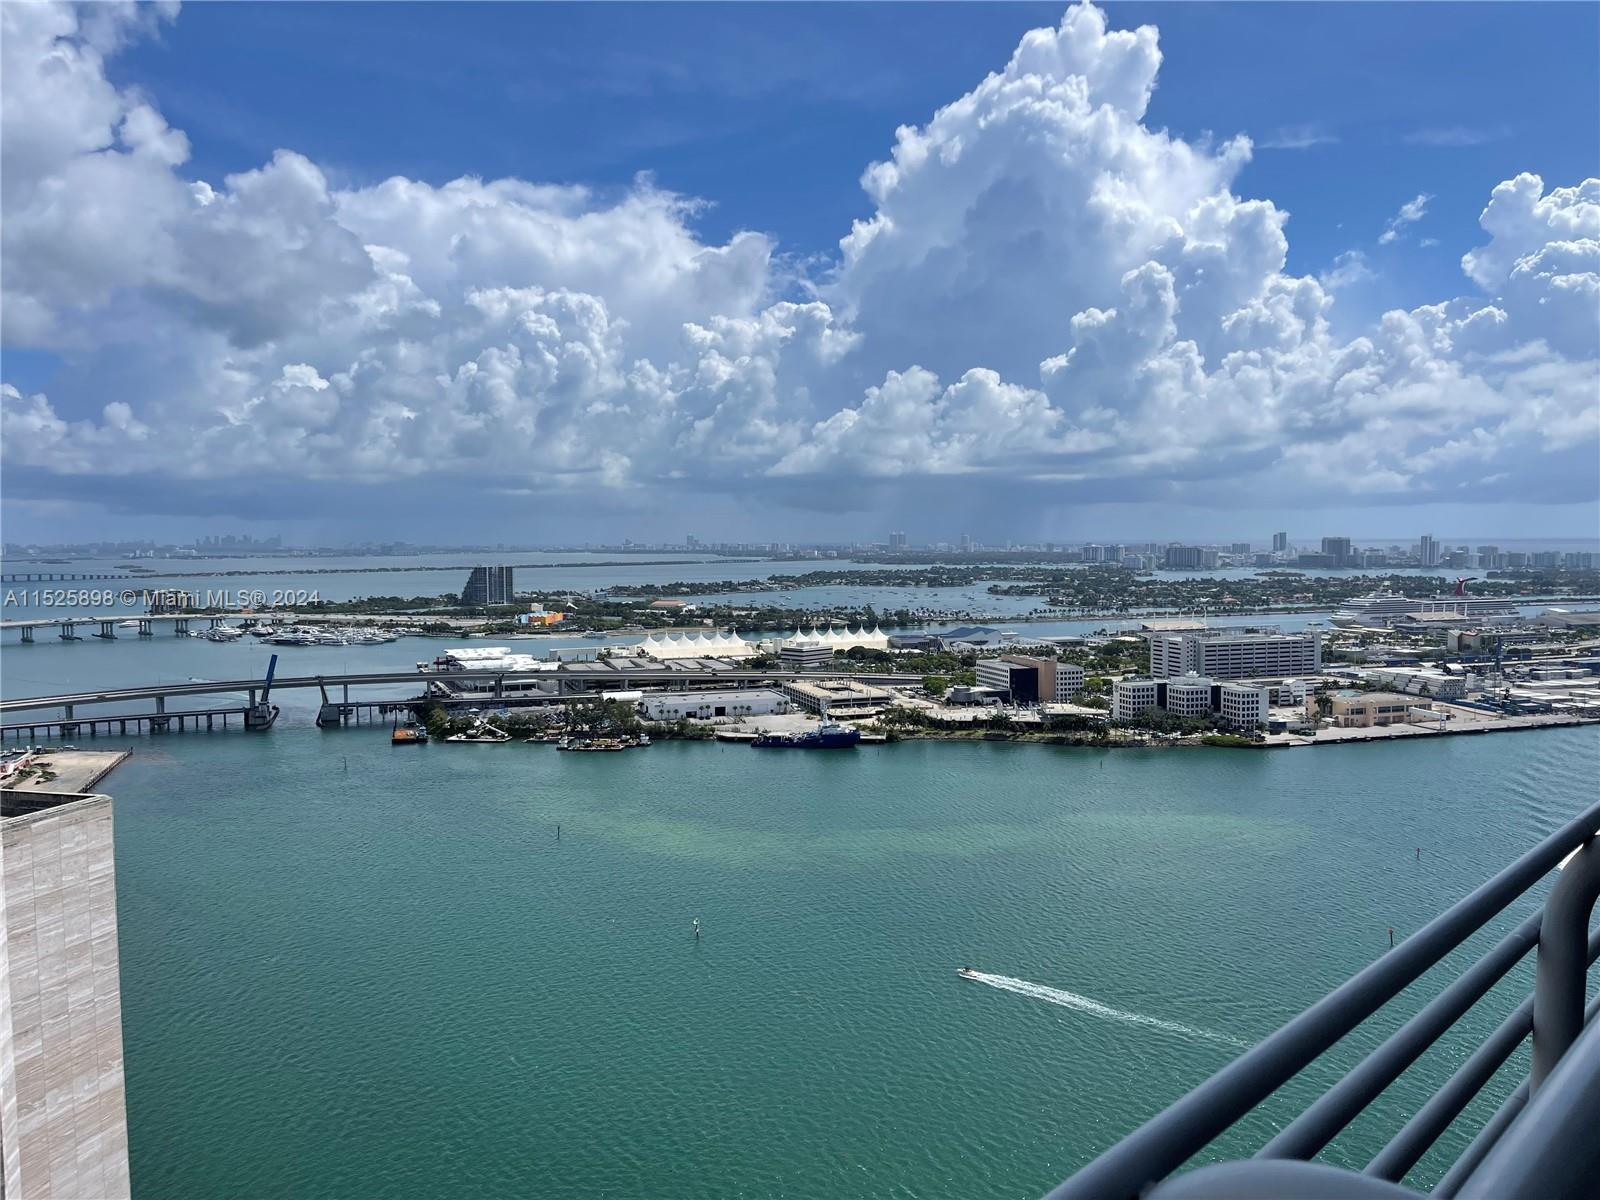 Enjoy gorgeous views from this upgraded lower penthouse unit at One Miami East. Soaring ceilings and waterfront
location make this an enviable property. Walking distance to the city's best dining and entertainment.  This property is perfect to enjoy the best that Miami has to offer.